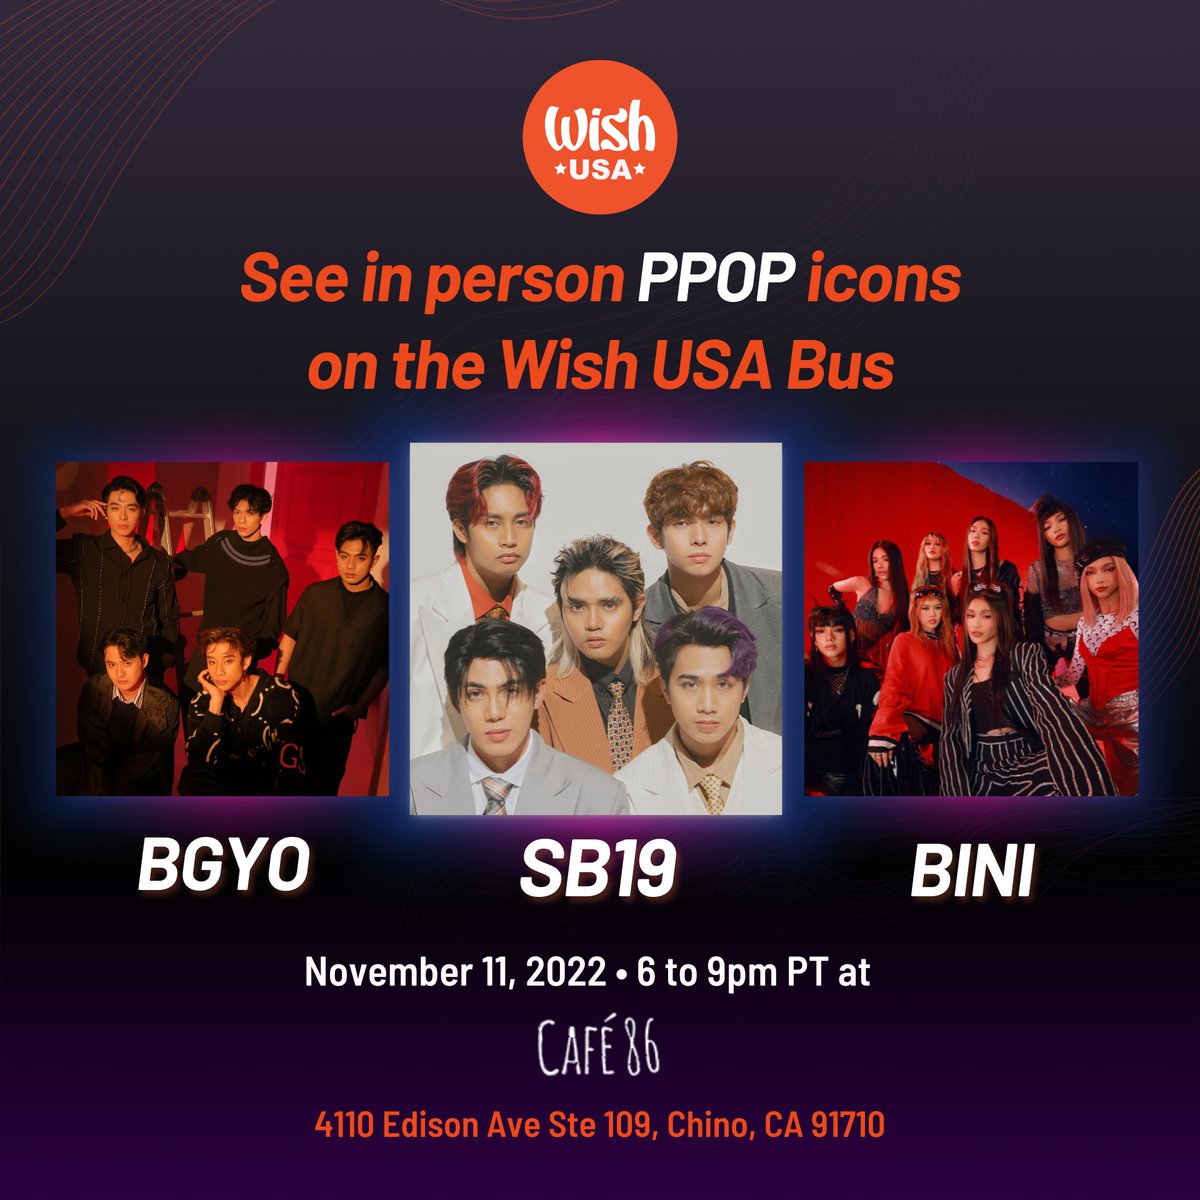 Take a peak at the live Wishclusive Recording of PPOP icons @BINI_ph , @bgyo_ph , and @SB19Official  on November 11, 2022, from 6 to 9pm PT at Cafe 86 - 4110 Edison Ave Ste 109, Chino, CA 91710.